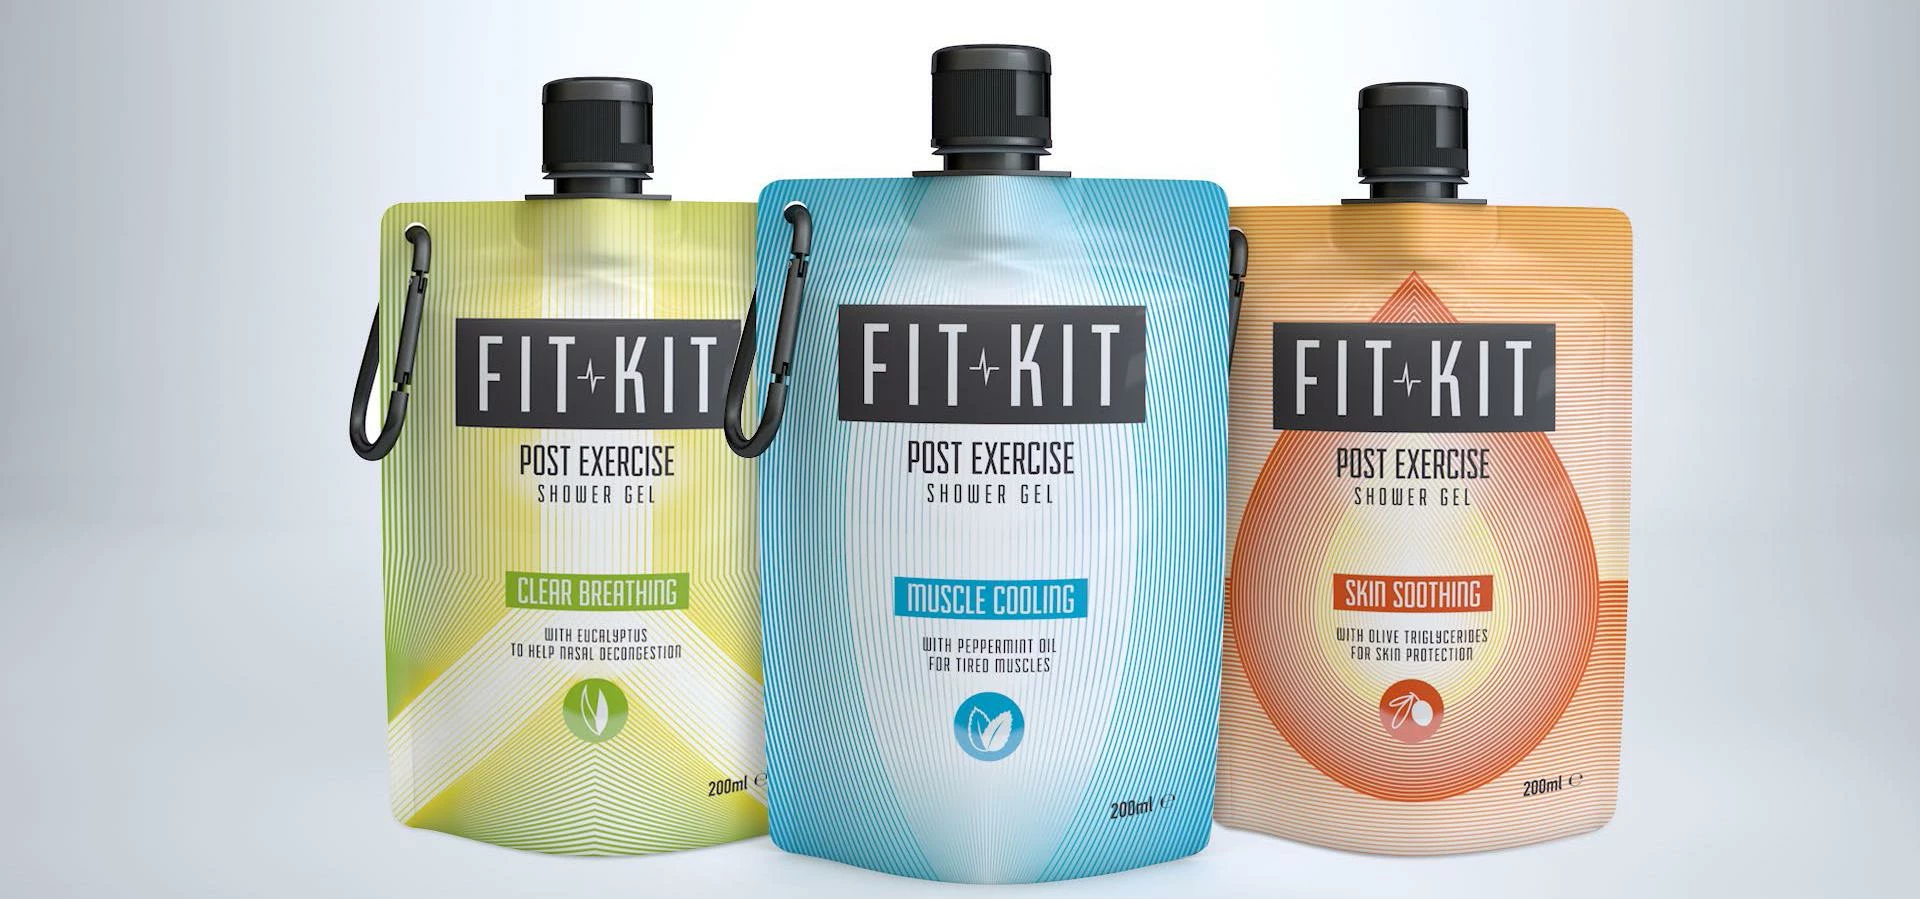 Life hack shower gel Fit Kit rebrands with fresh look by INITIALS